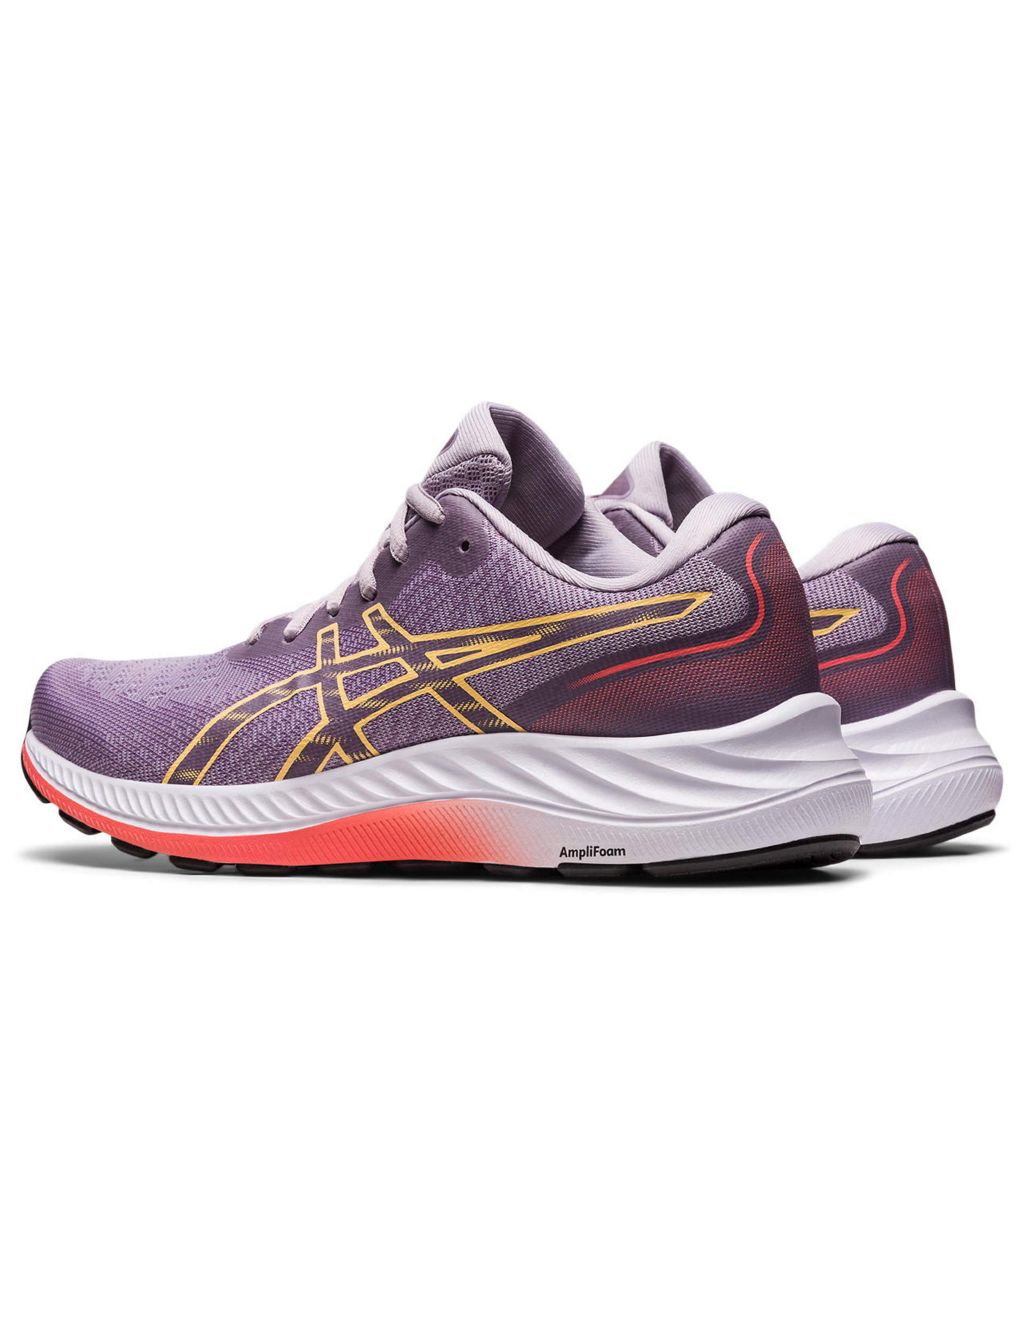 GEL™- Excite 9 Trainers image 6